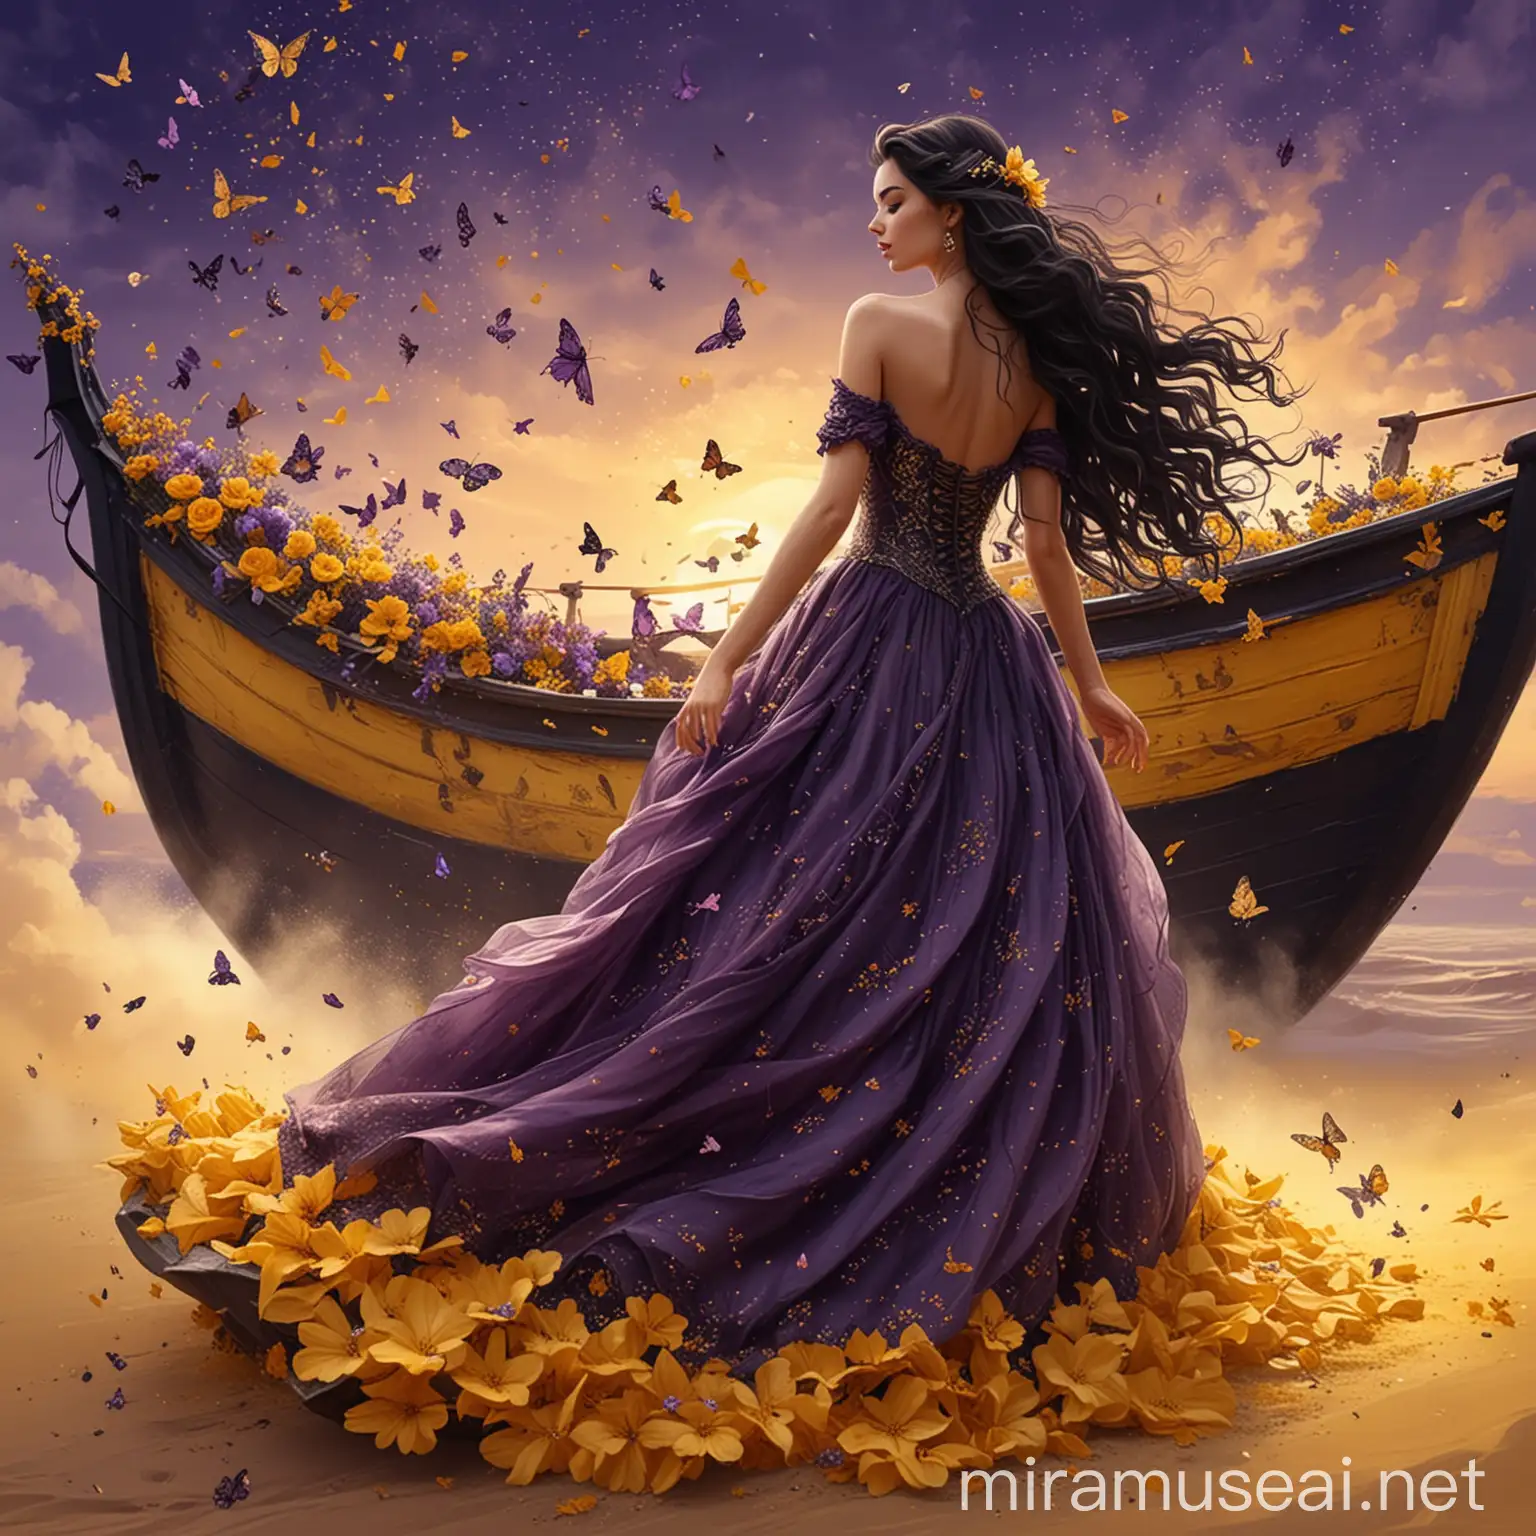 A beautiful a woman, from profile, dancing on yellow dust. Long black wavy hair. Hair with a flower. Long elegant dark purple wedding dress, haute couture. Background a floral boat. backgroind sky with butterflies. Fantasy, illustration, digital art, illustration art, fantasy art, digital painting